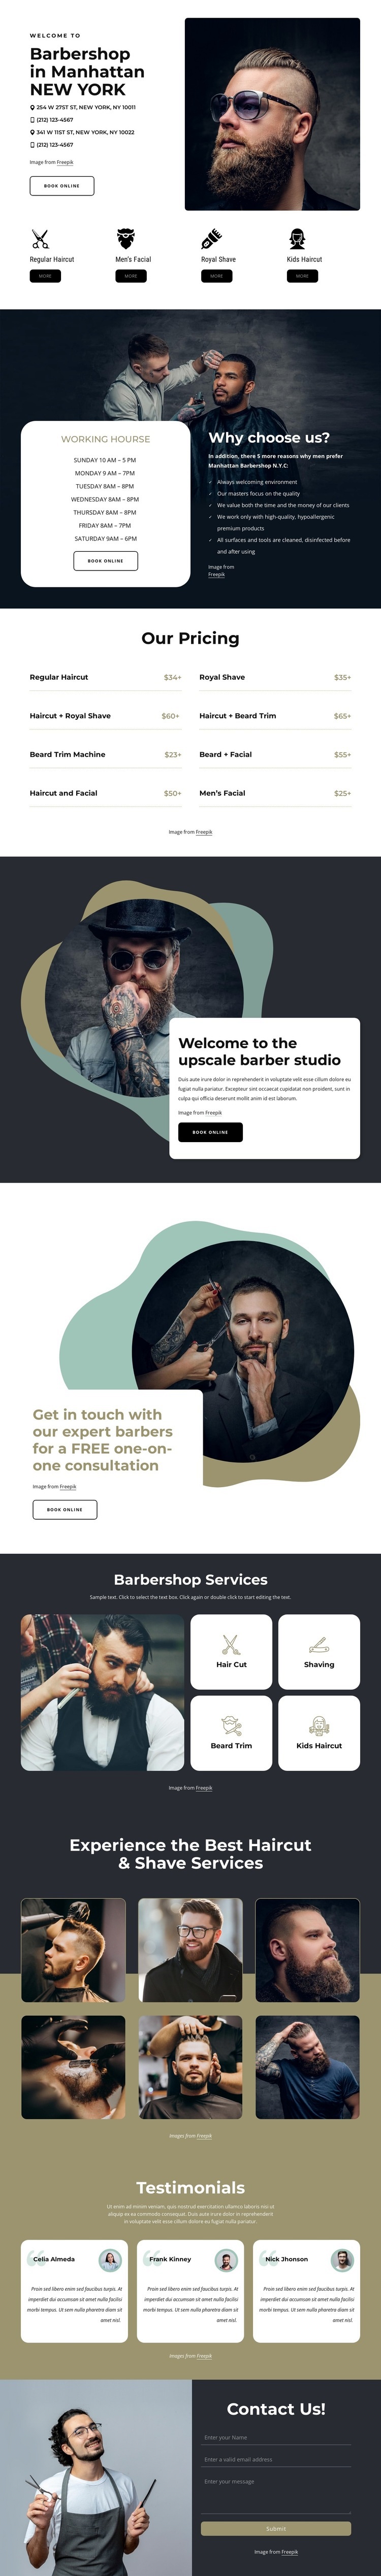 Hight quality grooming services Html Code Example